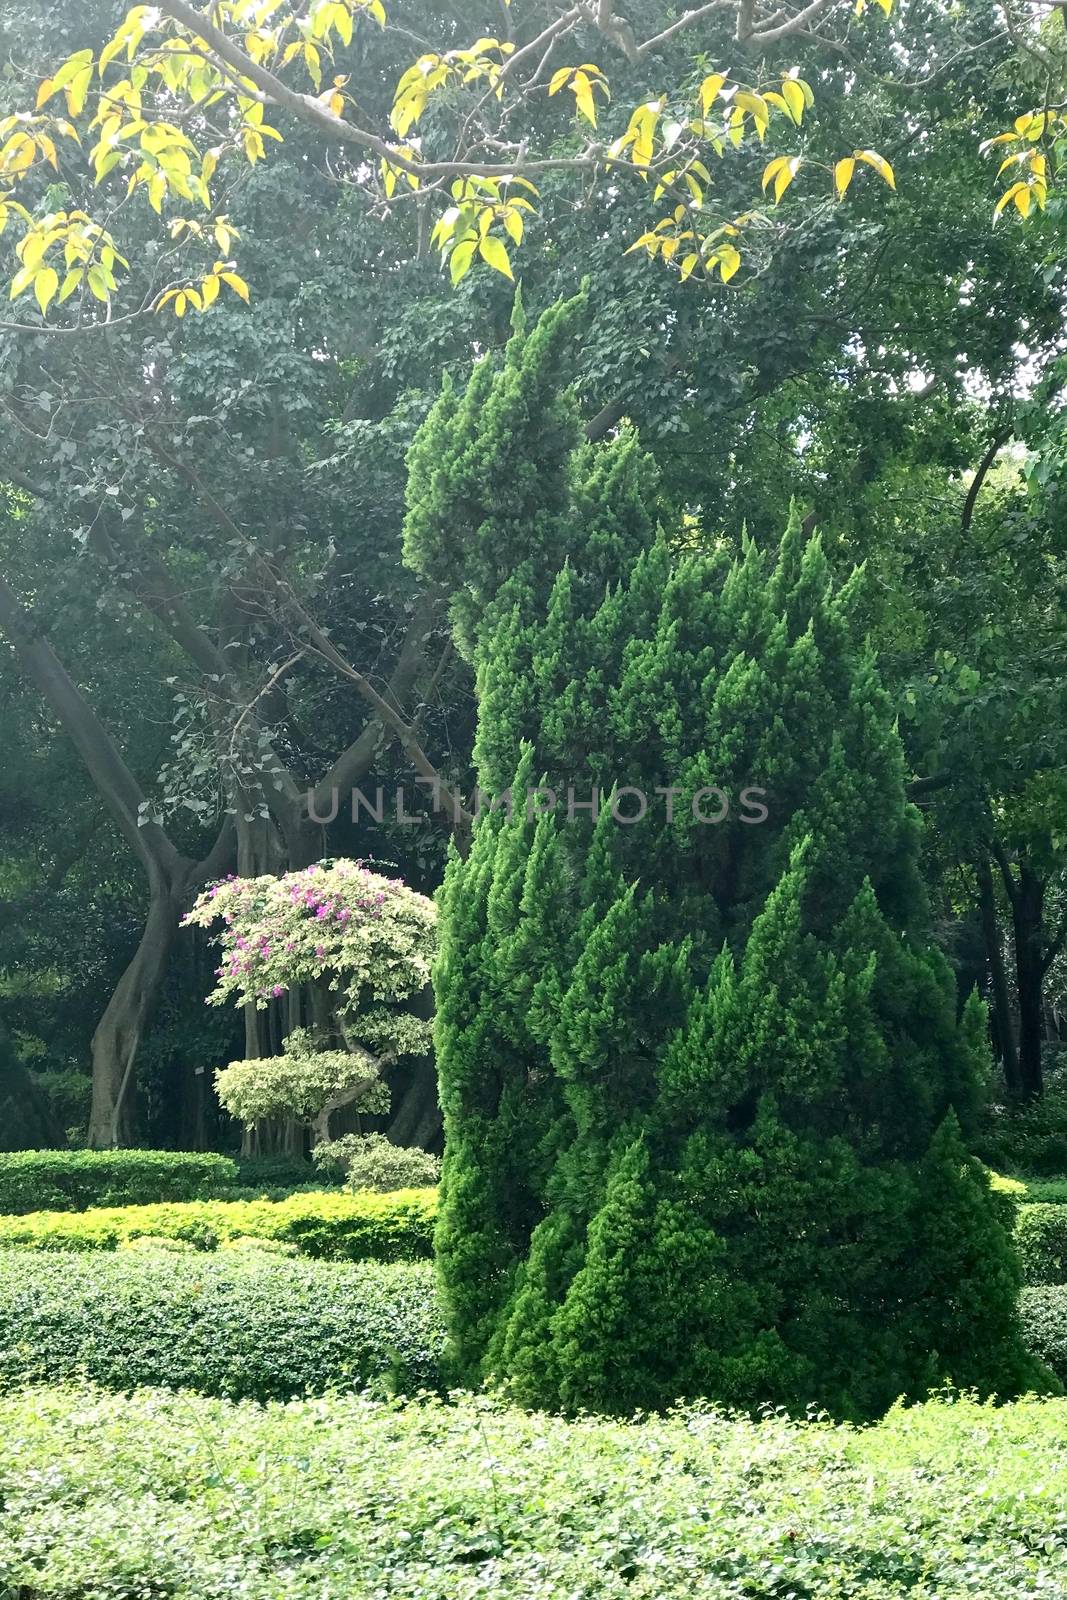 Vertical green plant and tree in the public garden